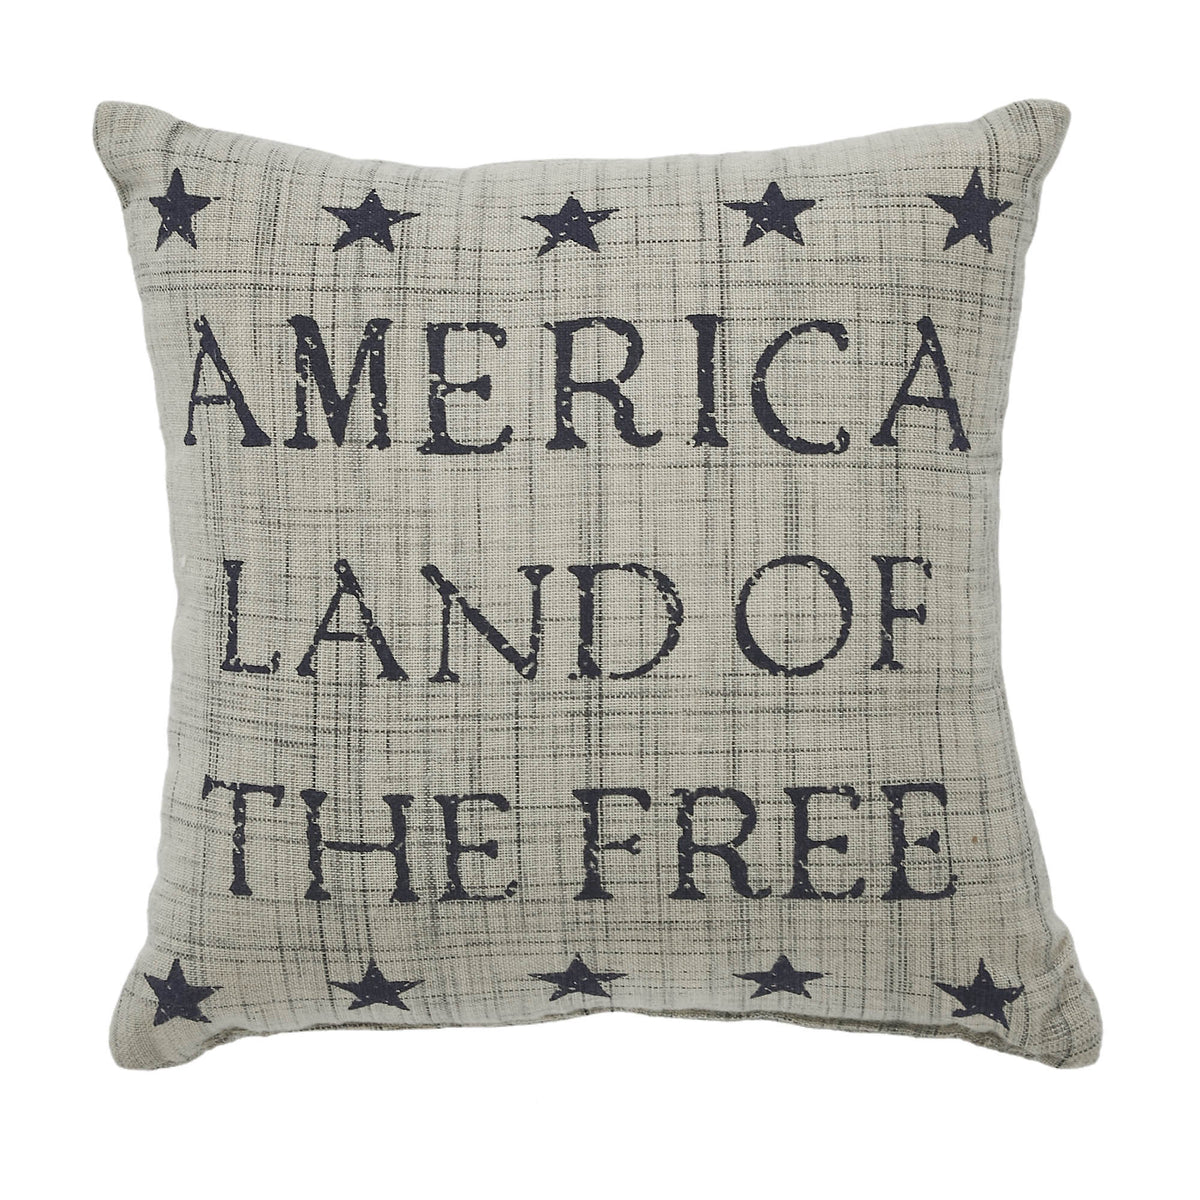 My Country Land of the Free Pillow 6x6